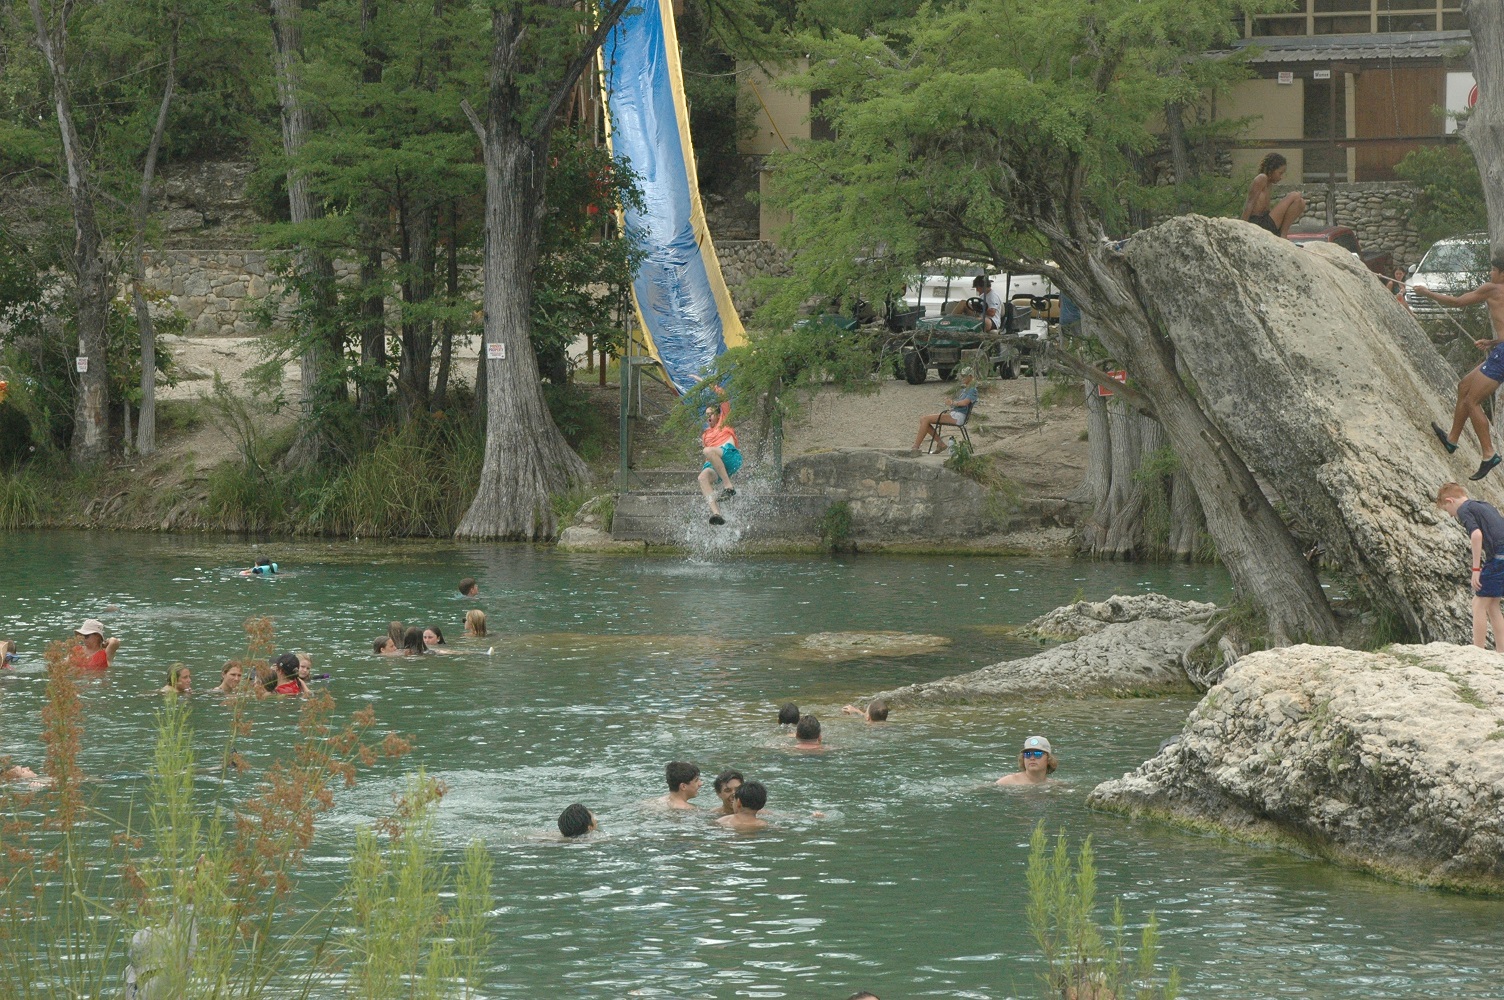 This week’s calendar of events for the Texas Hill Country River Region